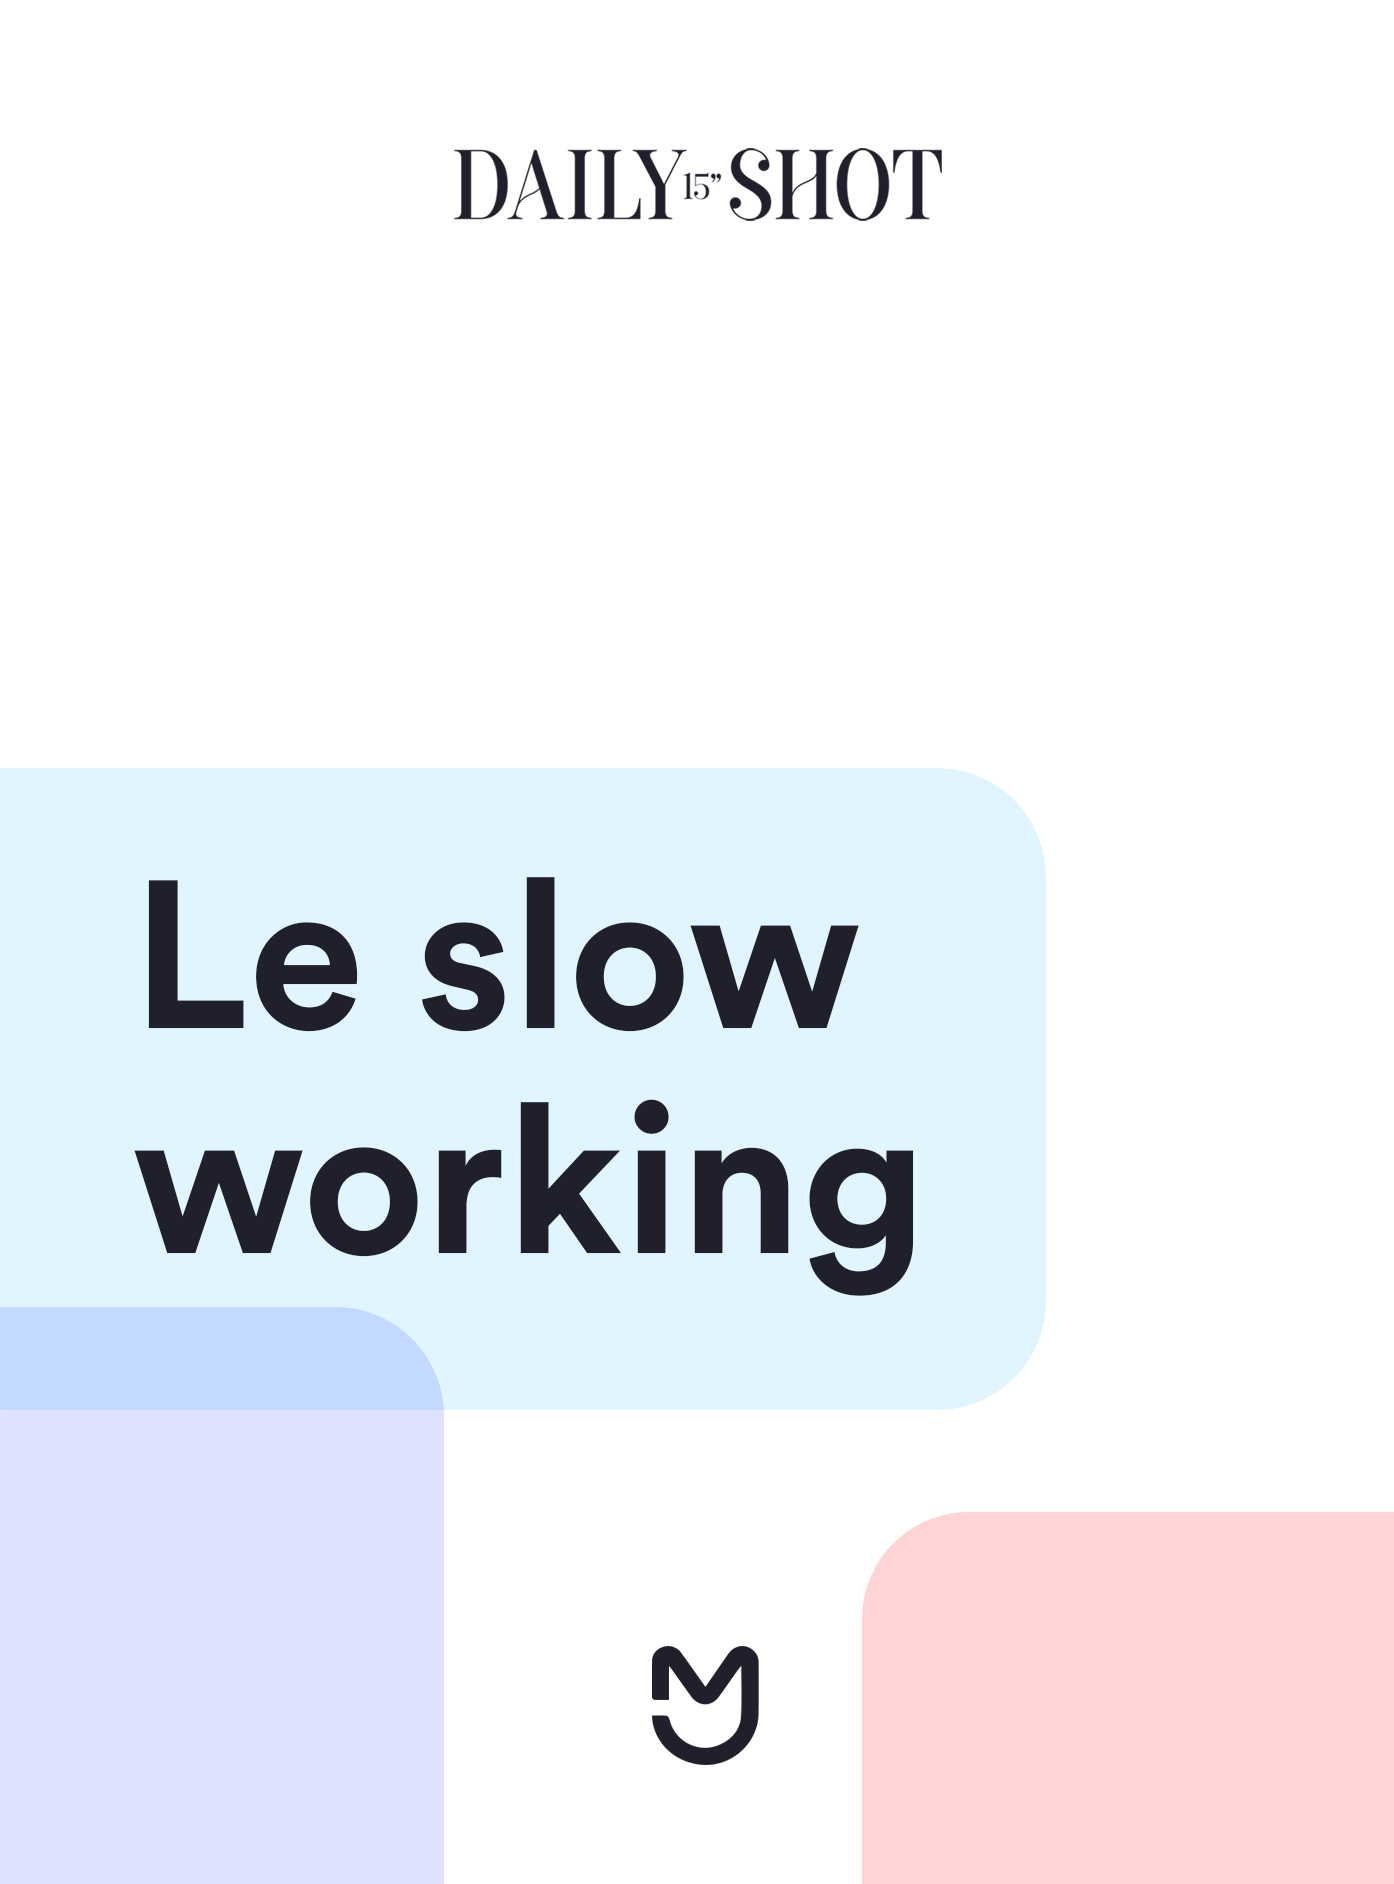 Le slow working